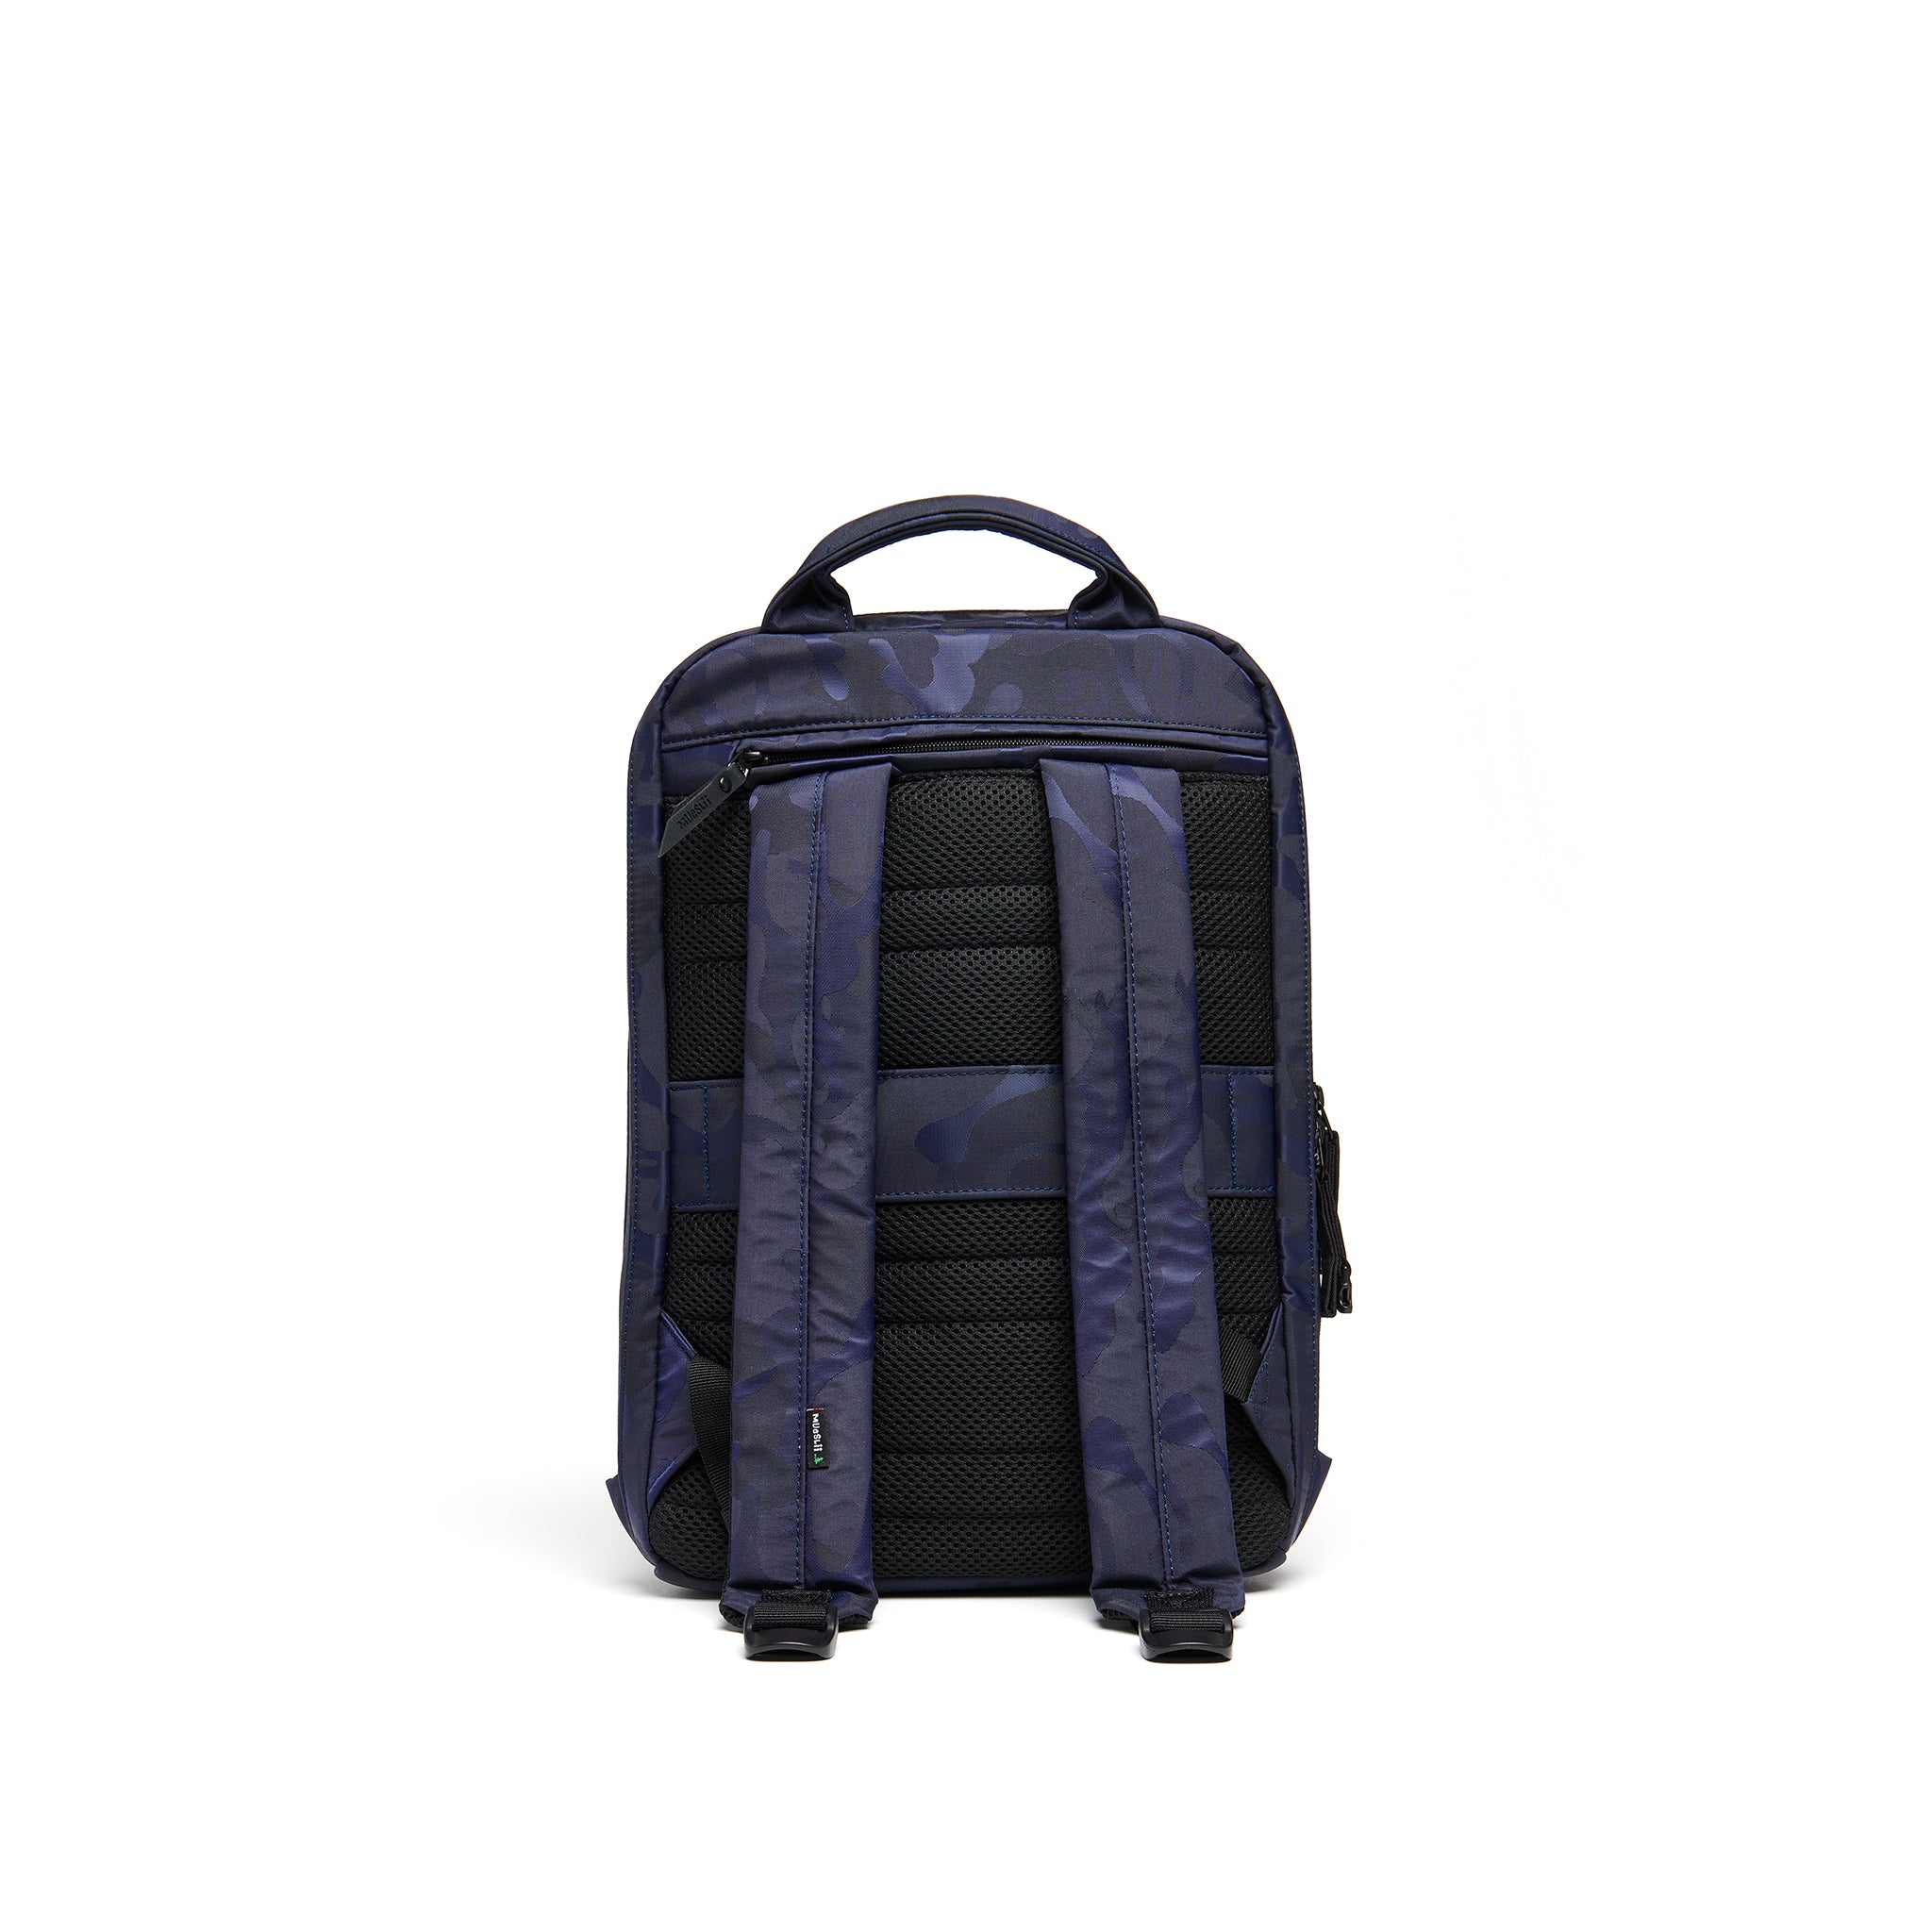 Mueslii small backpack, made of jacquard  waterproof nylon, camouflage pattern, with a laptop compartment, color blue, back view.